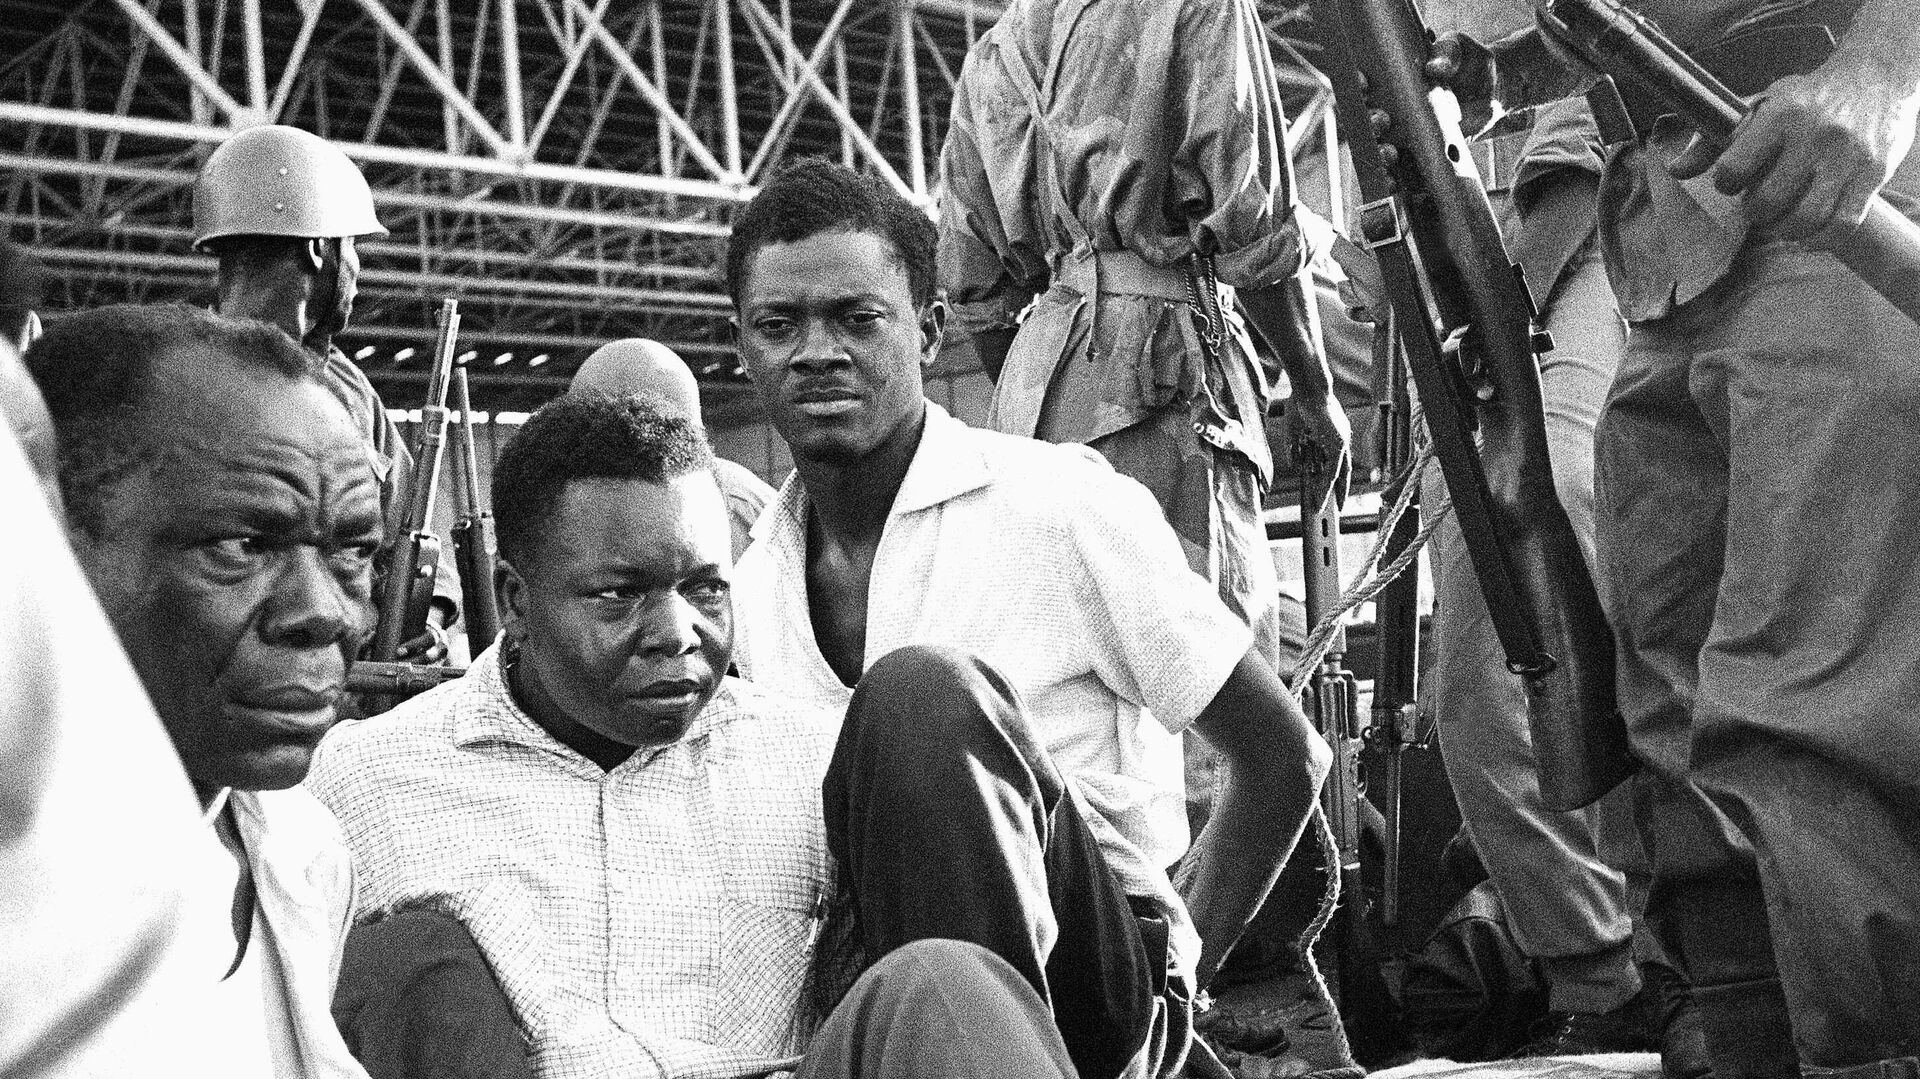 Congo's former prime minister Patrice Lumumba, center right, with hands tied behind his back, sits in a truck upon arrival at Leopoldville (now Kinshasa) Airport in Congo, Dec. 2, 1960, following his arrest the previous day. On Monday, more than sixty one years after his death, the mortal remains of Congo's first democratically elected prime minister Patrice Lumumba will be handed over to his children during an official ceremony in Belgium. - Sputnik International, 1920, 30.06.2022